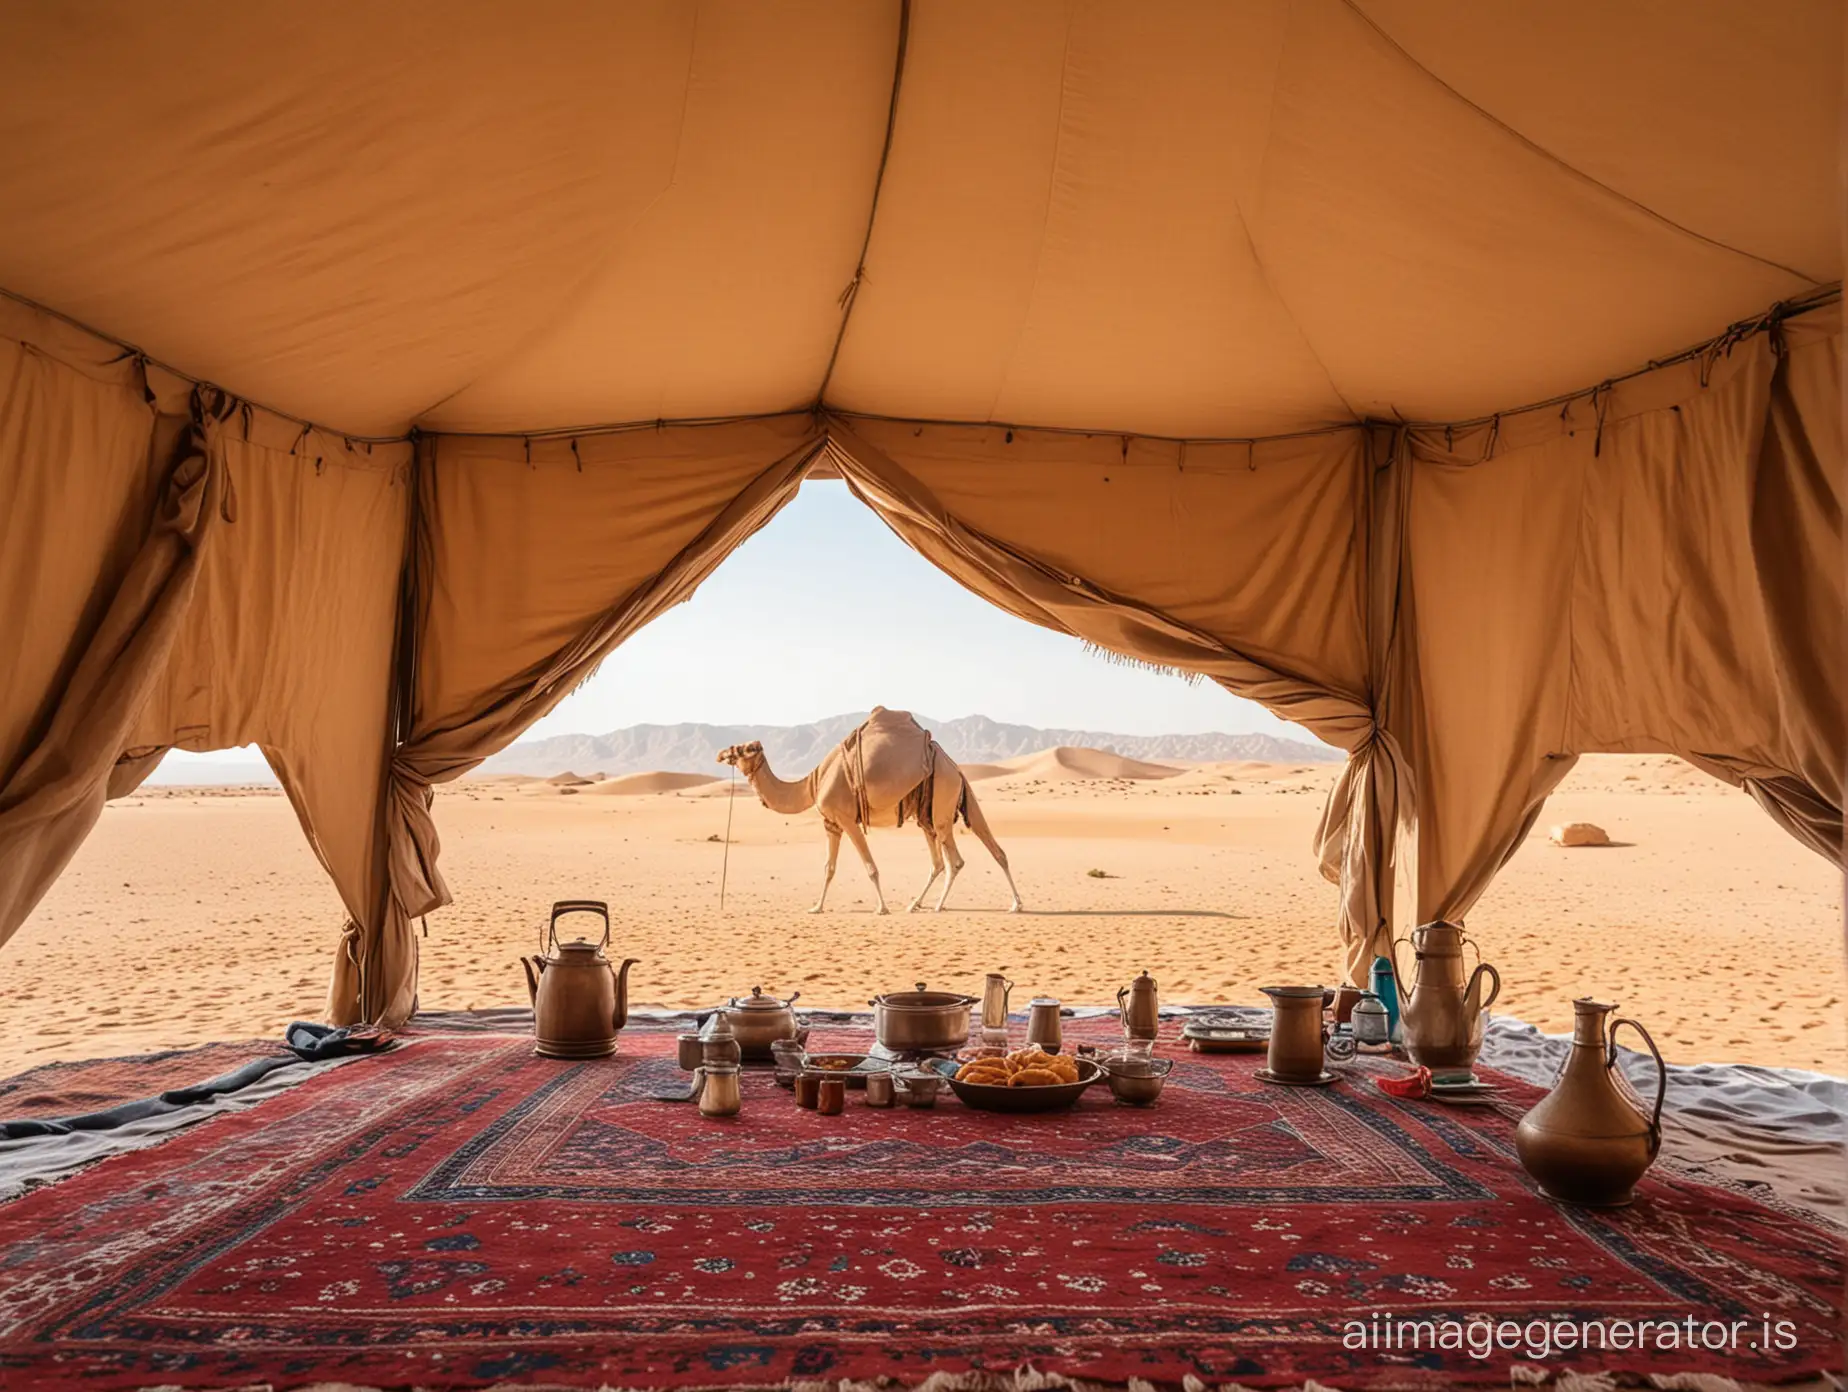 a desert inside paradise ramazan kareem islamic month morning lunch time with a beautiful old tent with no design and camel